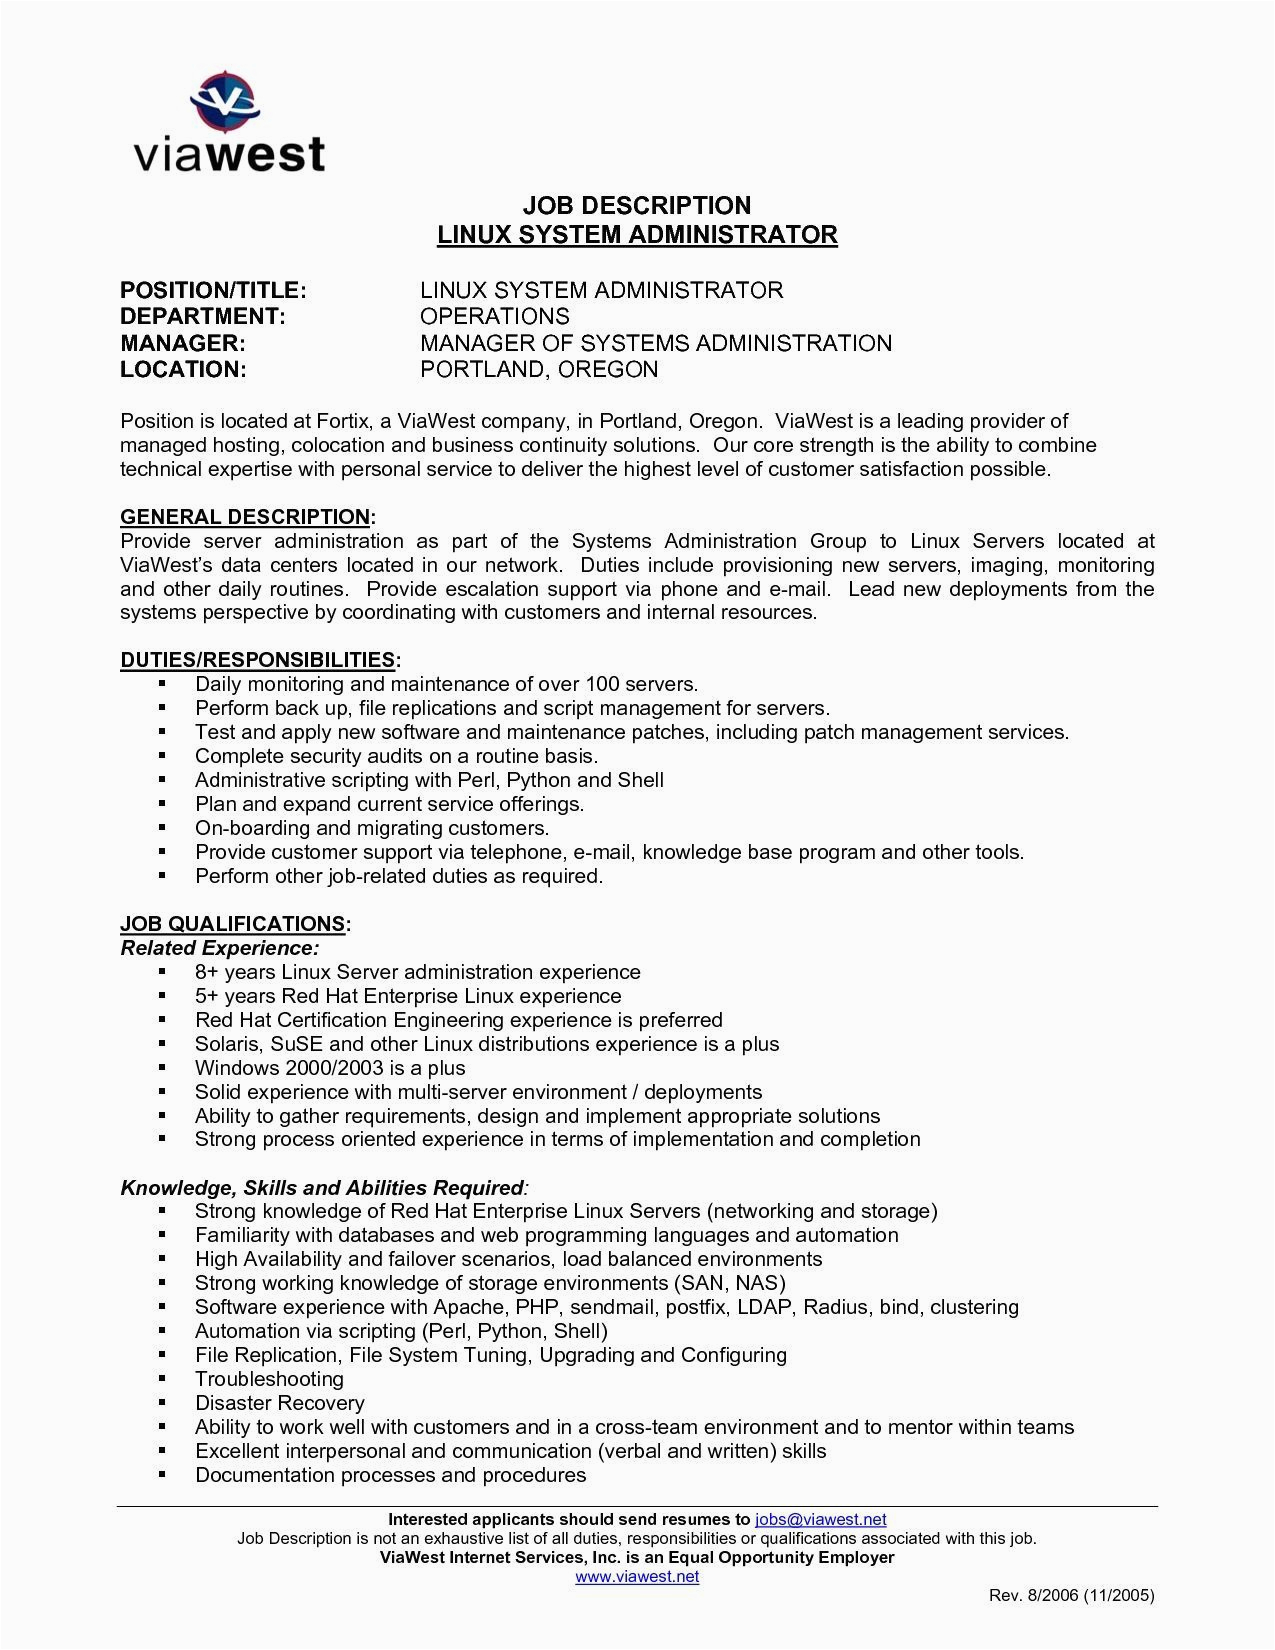 Linux System Administrator Sample Resume 5 Years Experience Resume format for 5 Years Experience In Operations Resume format